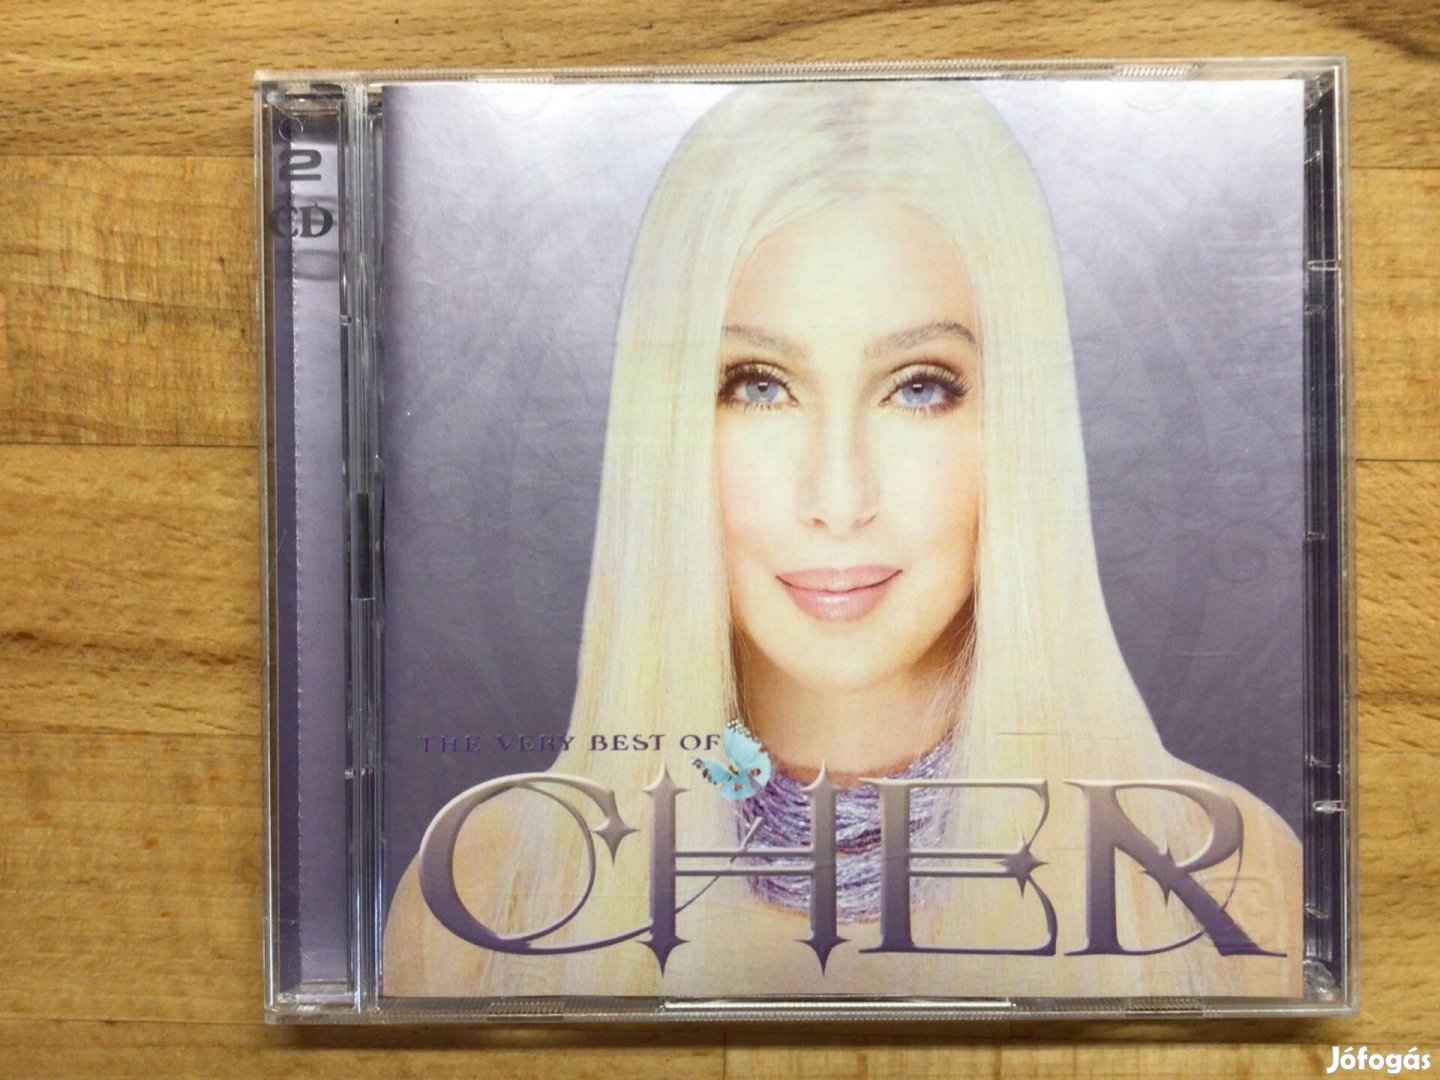 Cher- The Very Best Of, dupla cd album